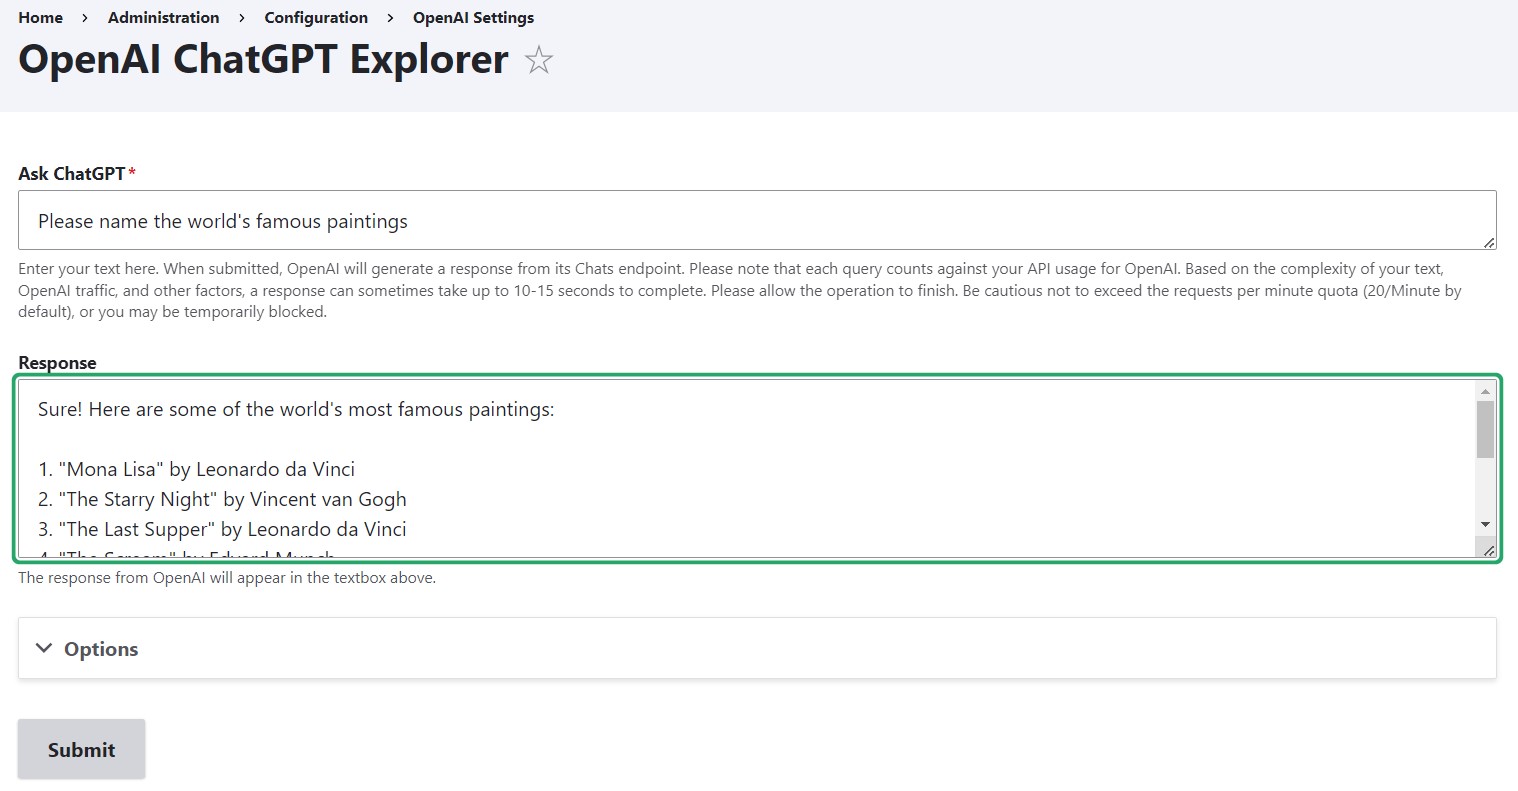 Interacting with ChatGPT on the ChatGPT Explorer page.